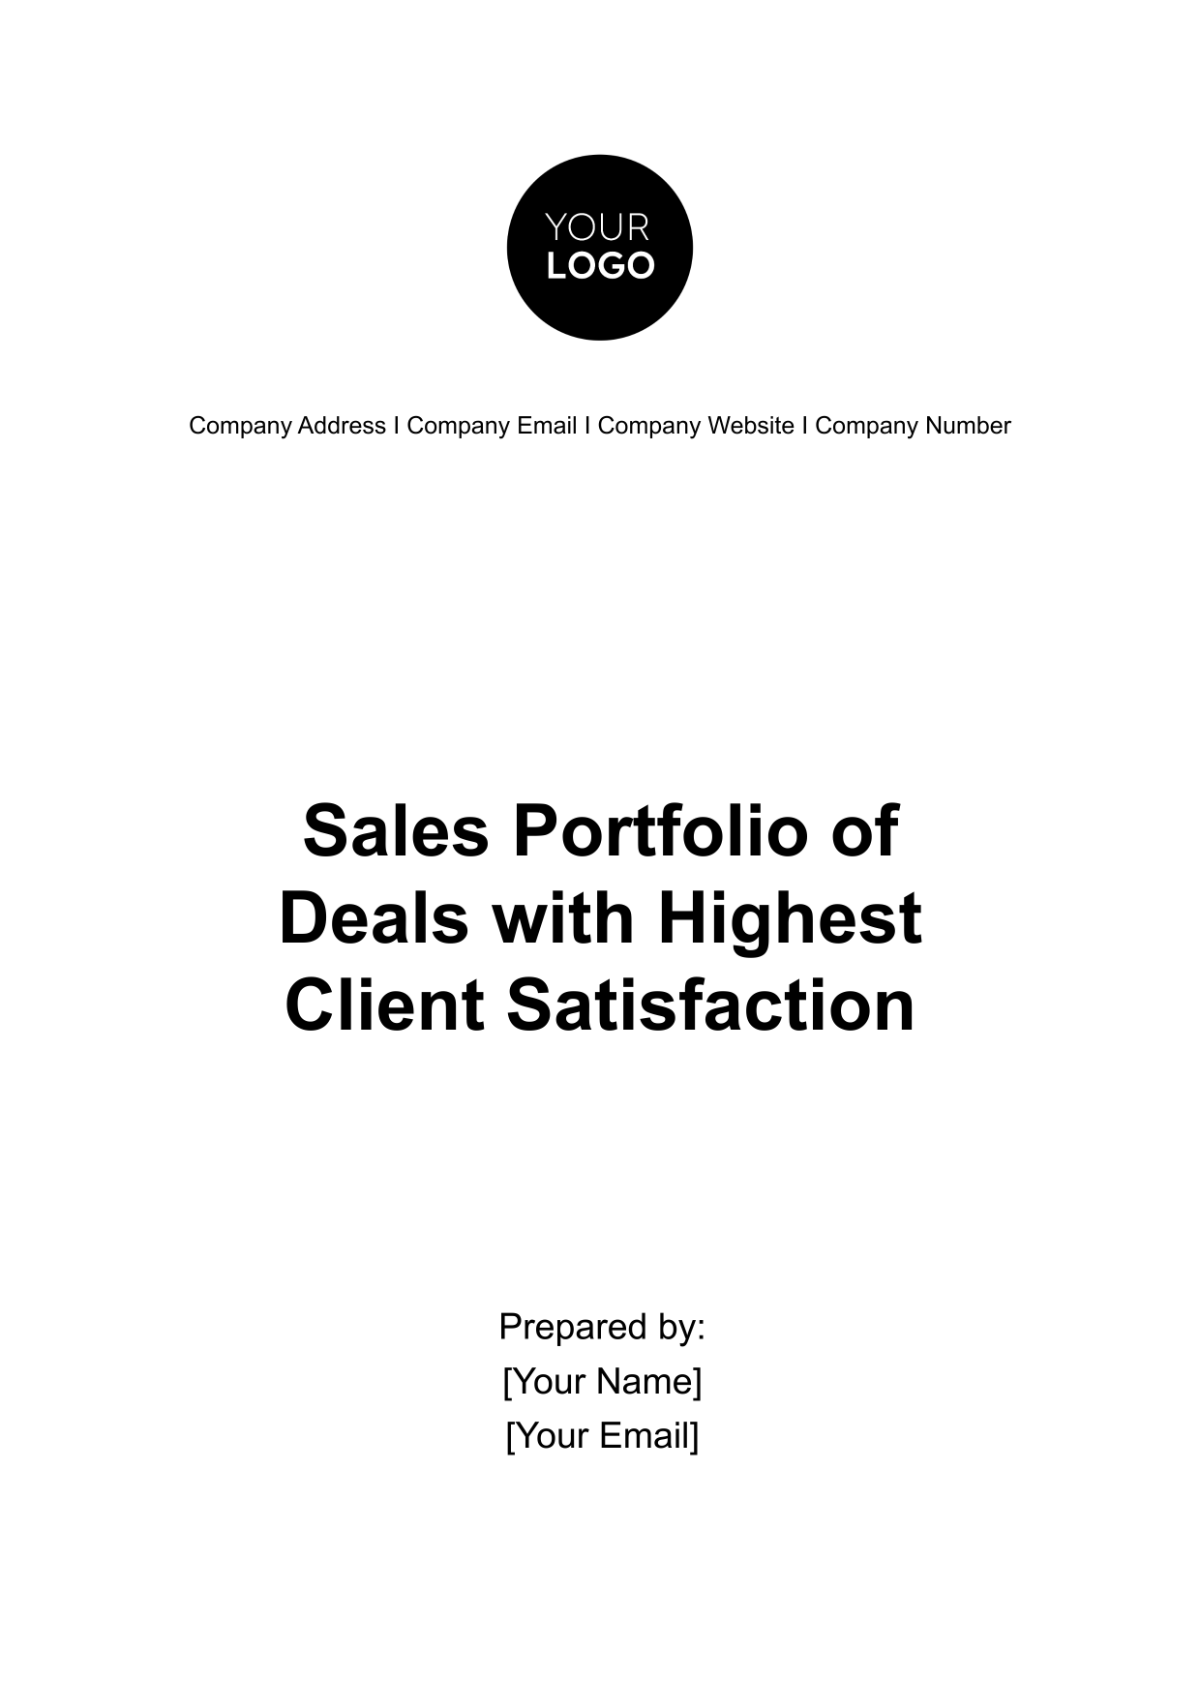 Free Sales Portfolio of Deals with Highest Client Satisfaction Template